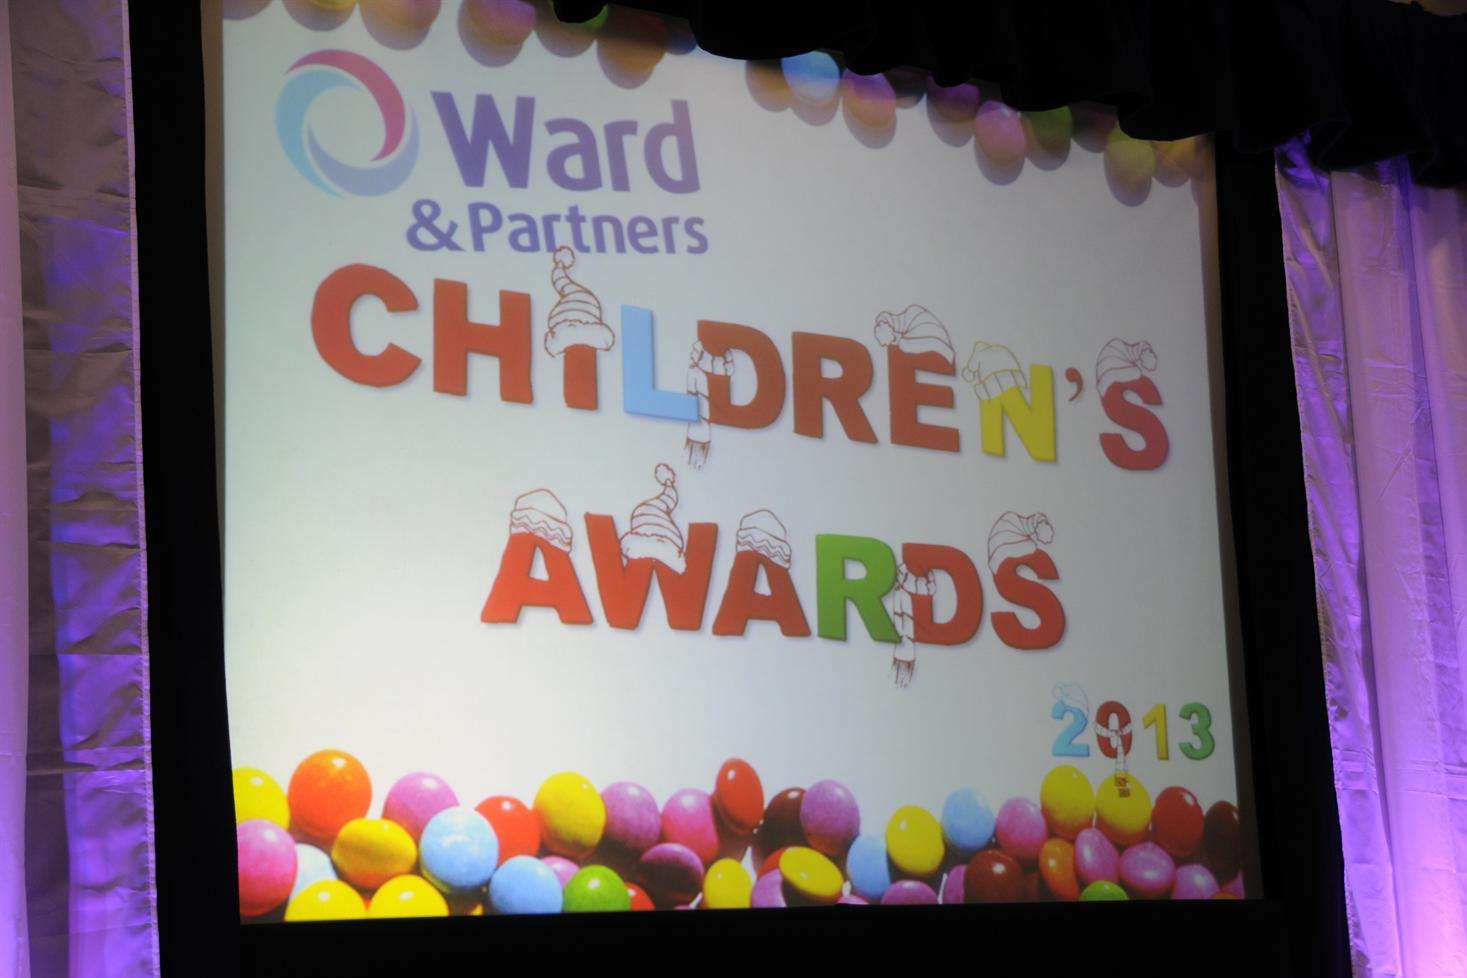 The glitzy Ward and Partners Children's Awards ceremony